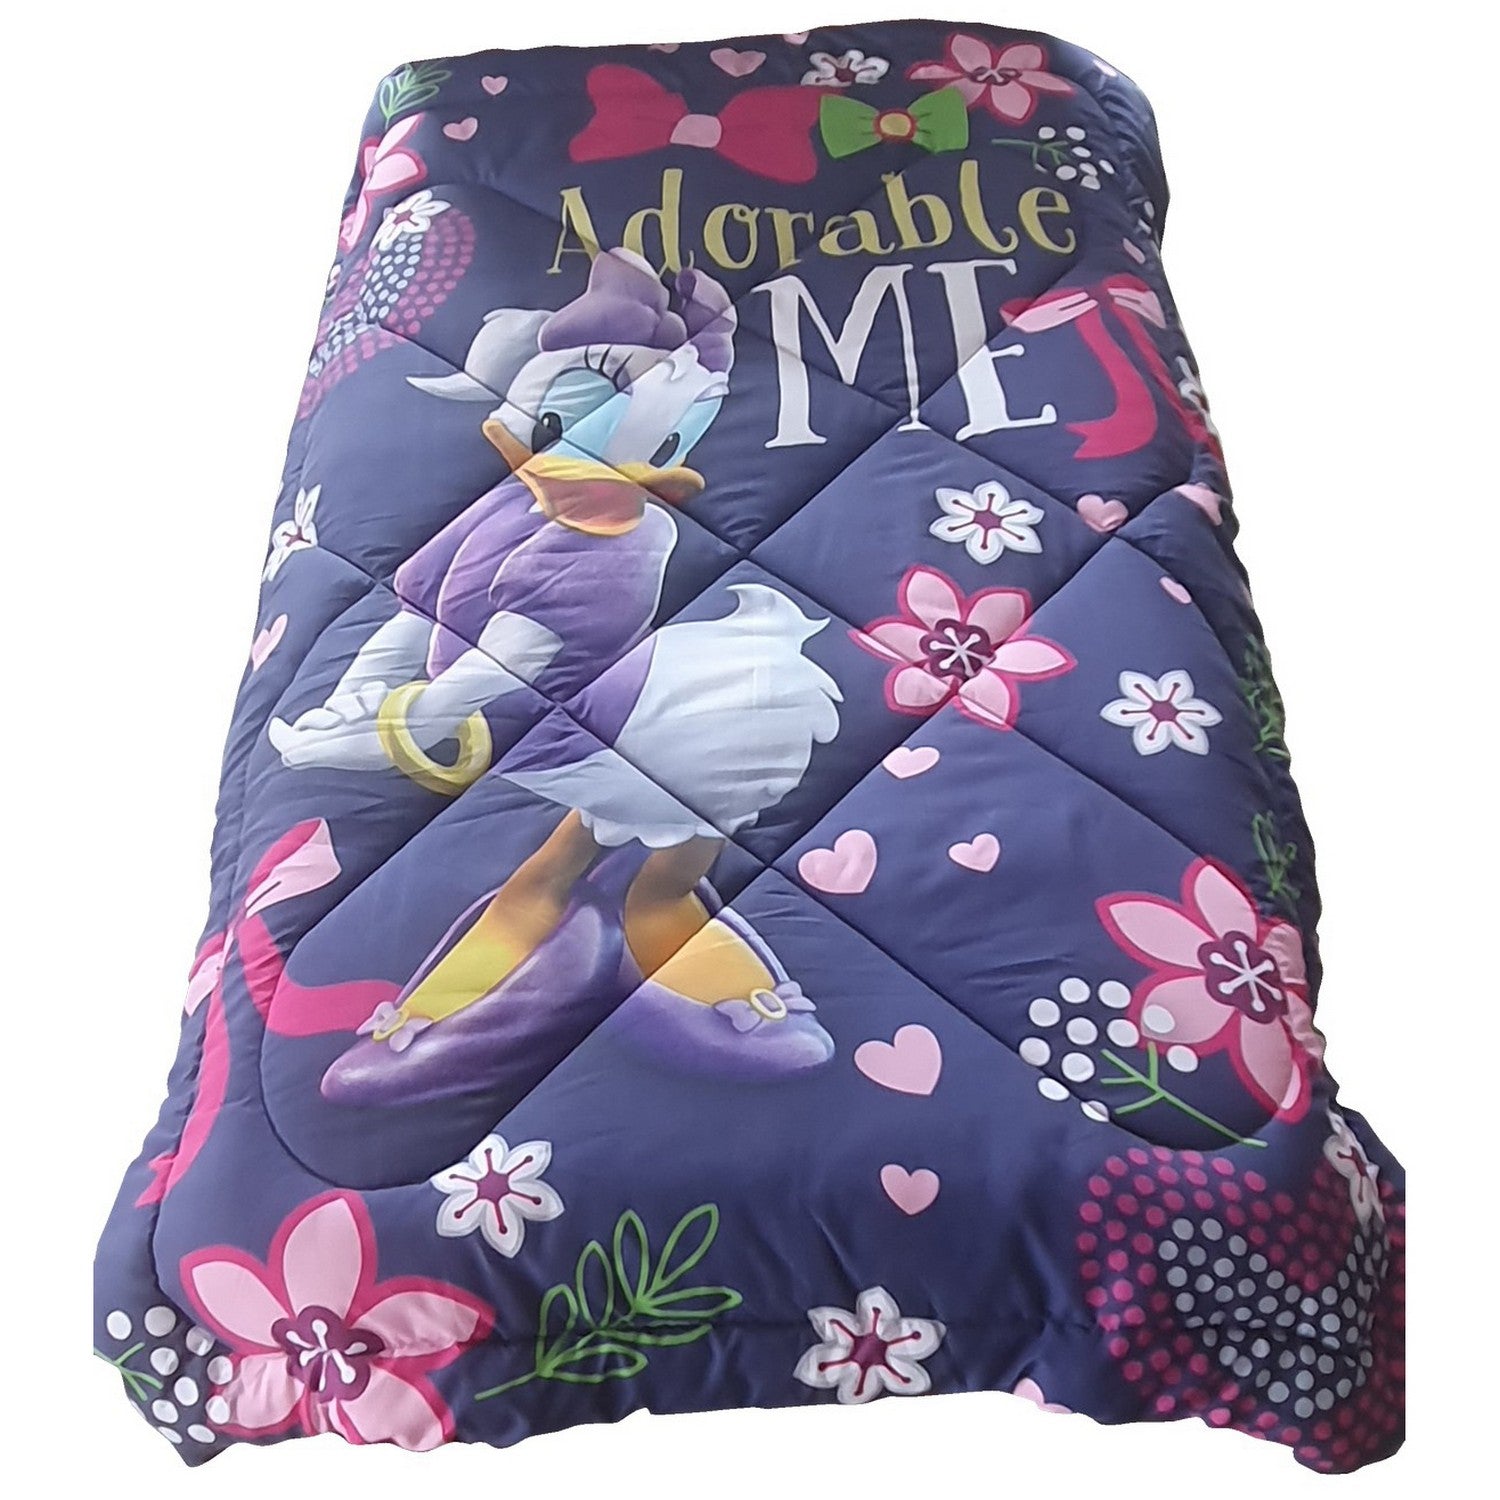 Disney Minnie Mouse Dancing in Blossom Comforter